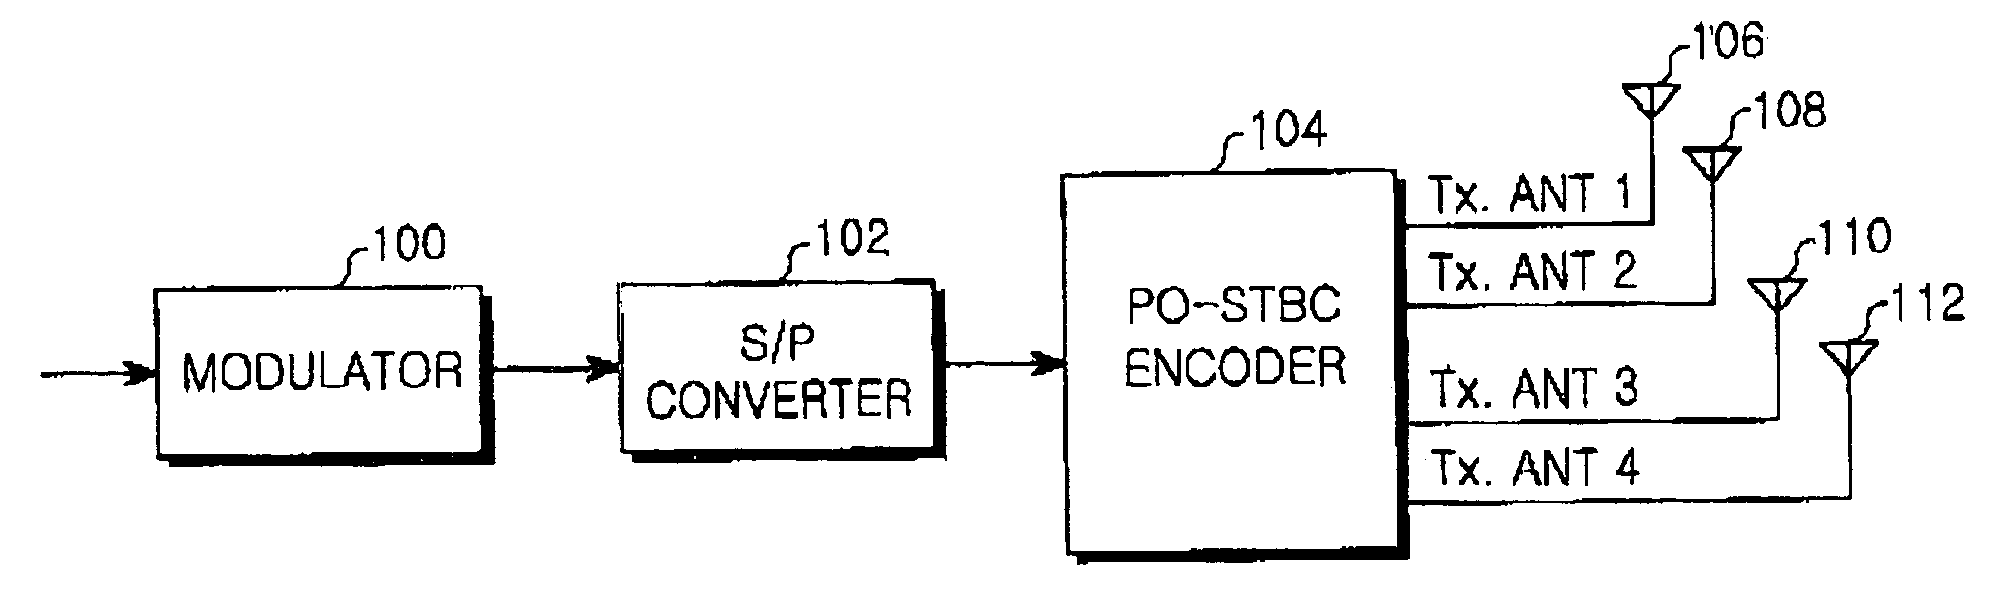 Apparatus and method for coding/decoding pseudo orthogonal space-time block code in a mobile communication system using multiple input multiple output scheme